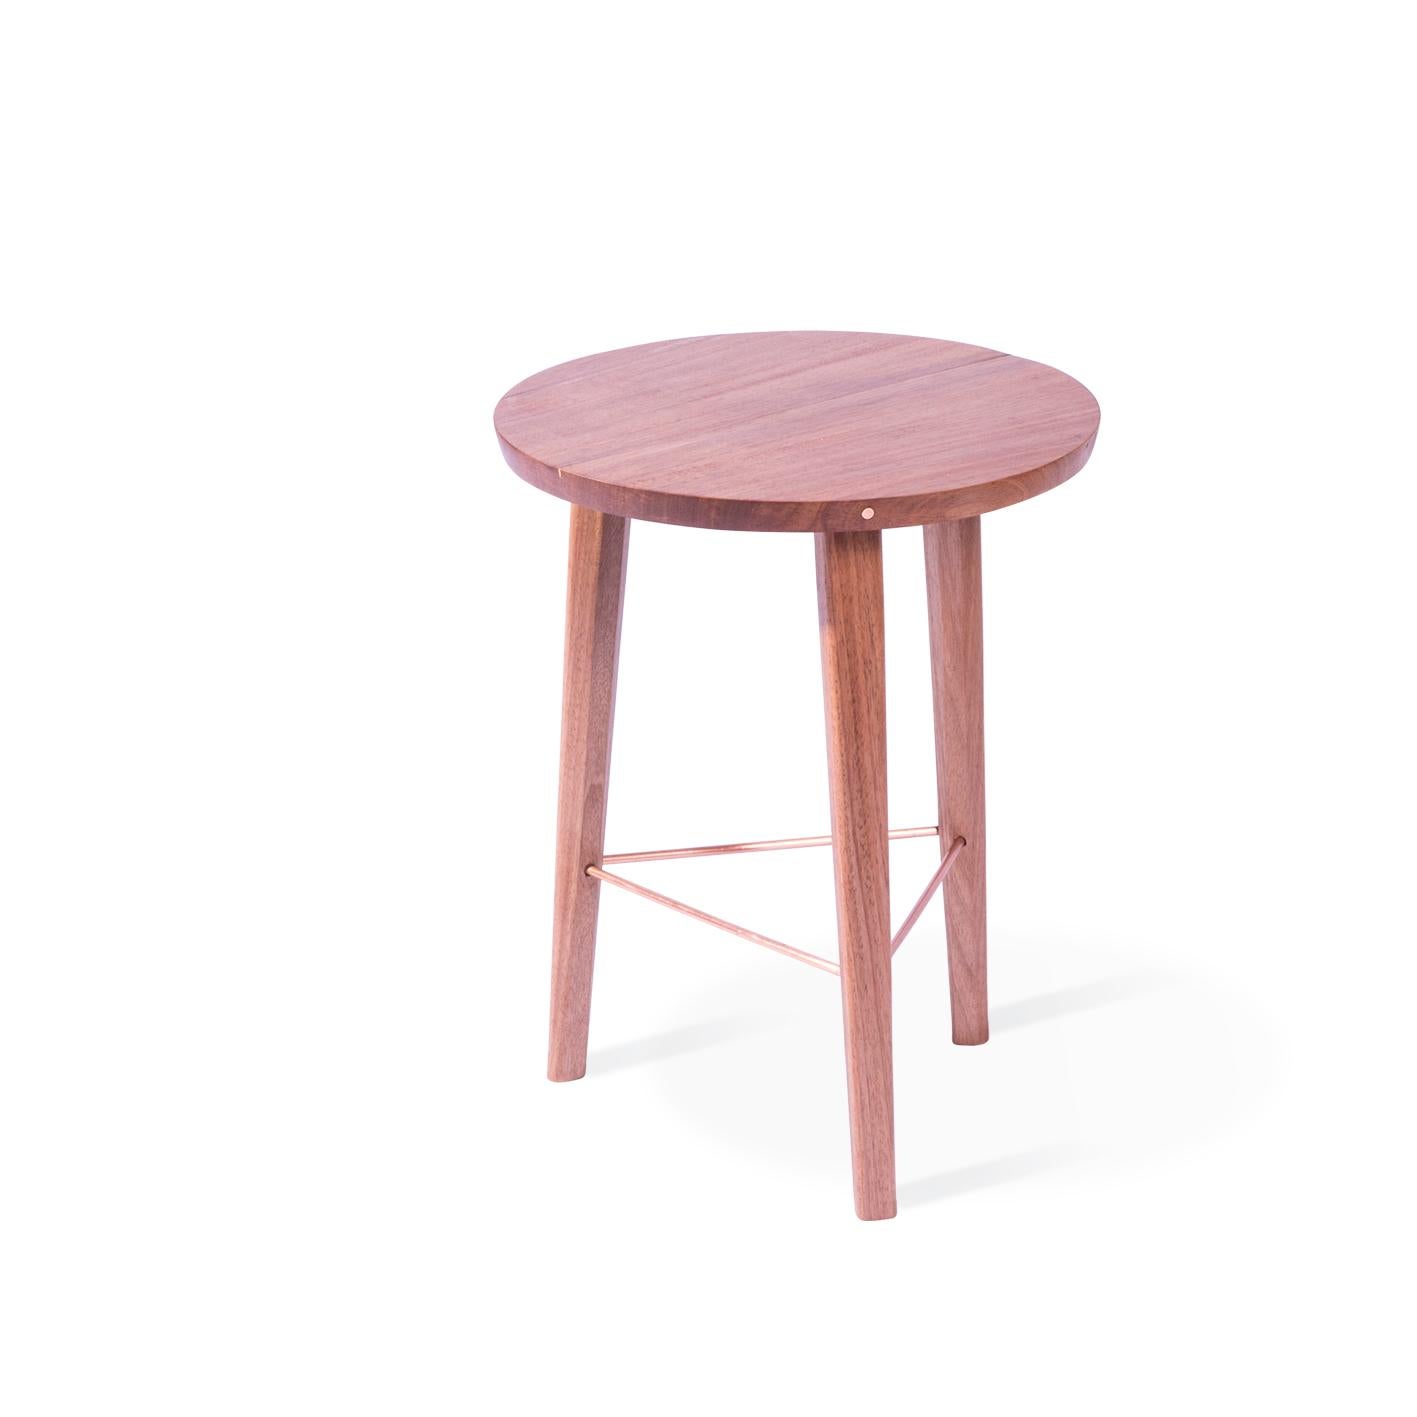 A clean and simple design for a traditional three-legged stool which gives it a thoroughly modern appeal through its copper details and slender appearance. The copper line on the seat marks the join in the wood and as such is different on each